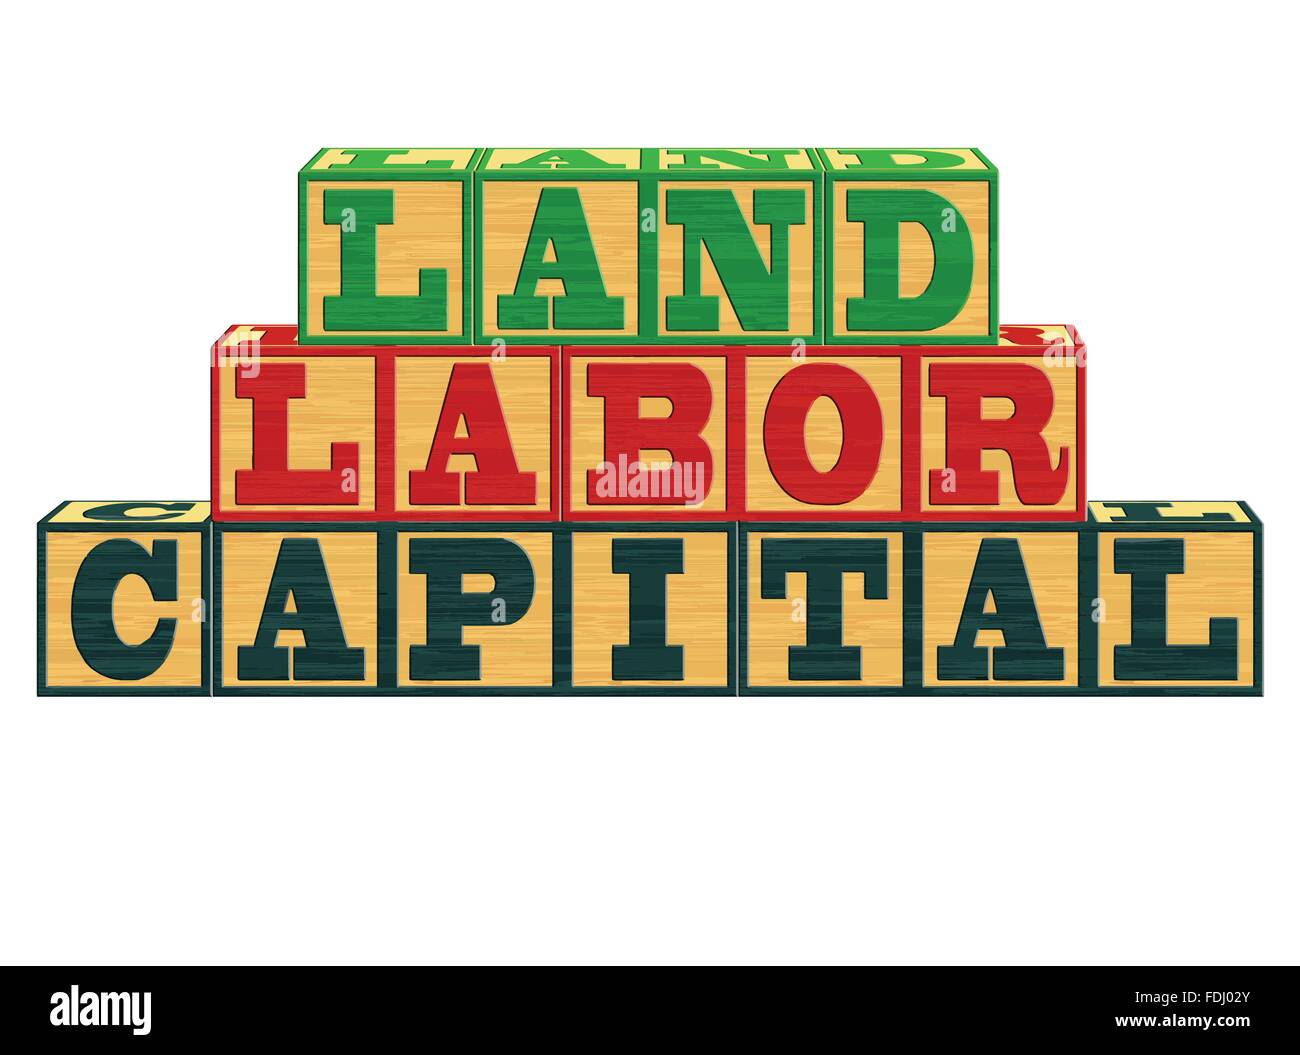 Factors of Production - Land, Labor, Capital Stock Vector